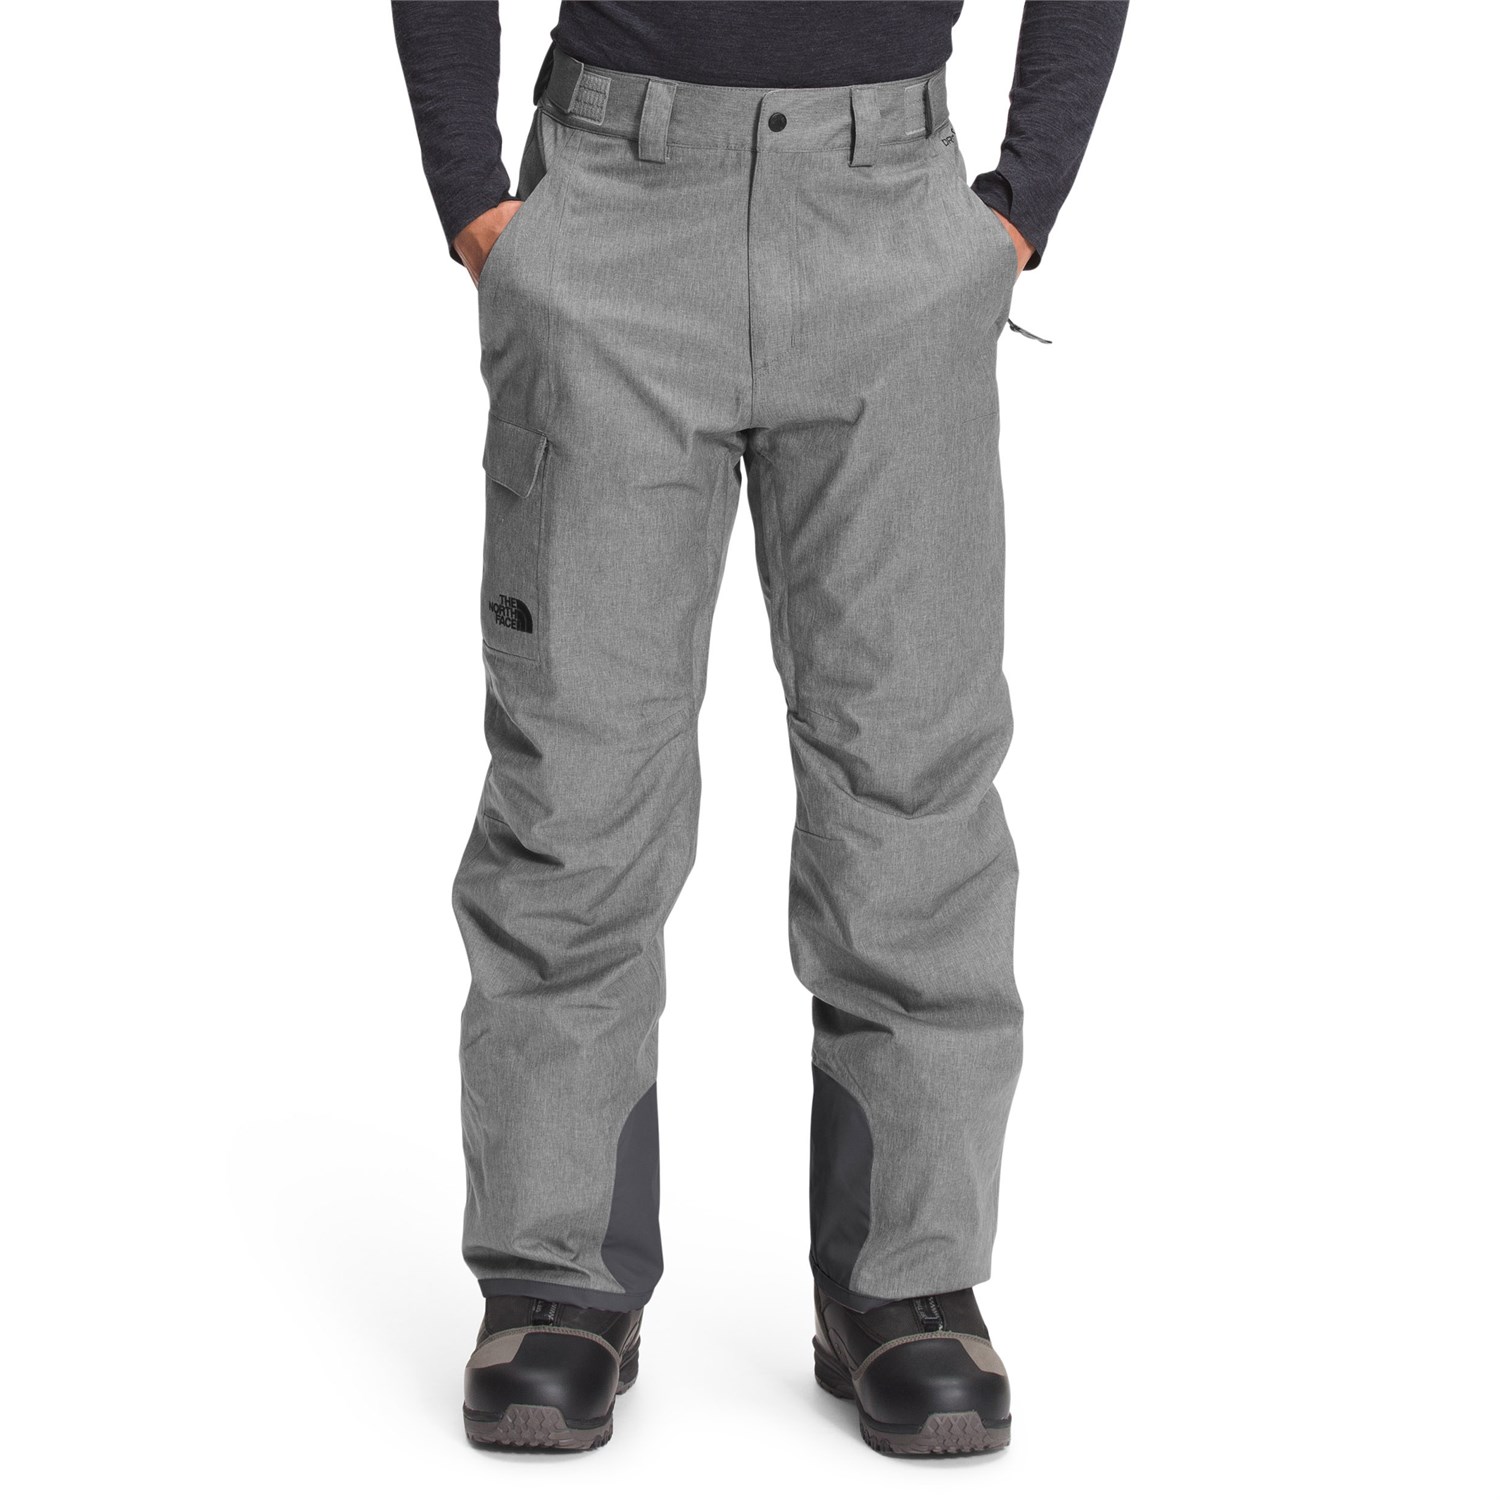 The North Face Freedom Bib - Ski trousers Men's, Buy online